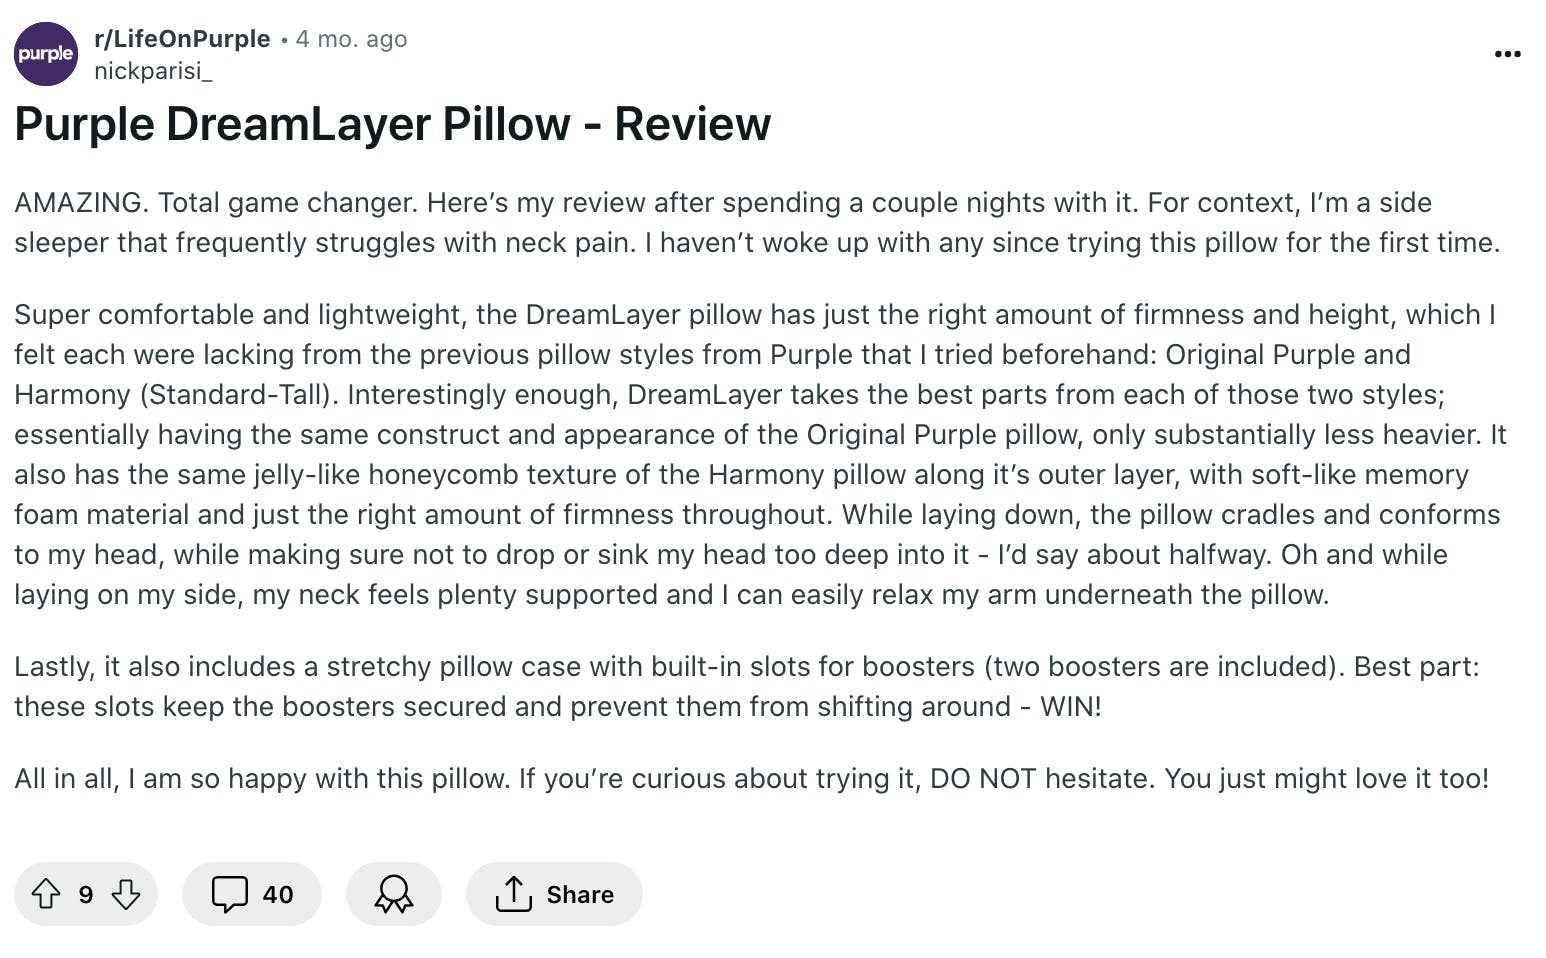 A screenshot of a post from the r/LifeOnPurple subreddit titled "Purple DreamLayer Pillow - Review" that has 40 comments.